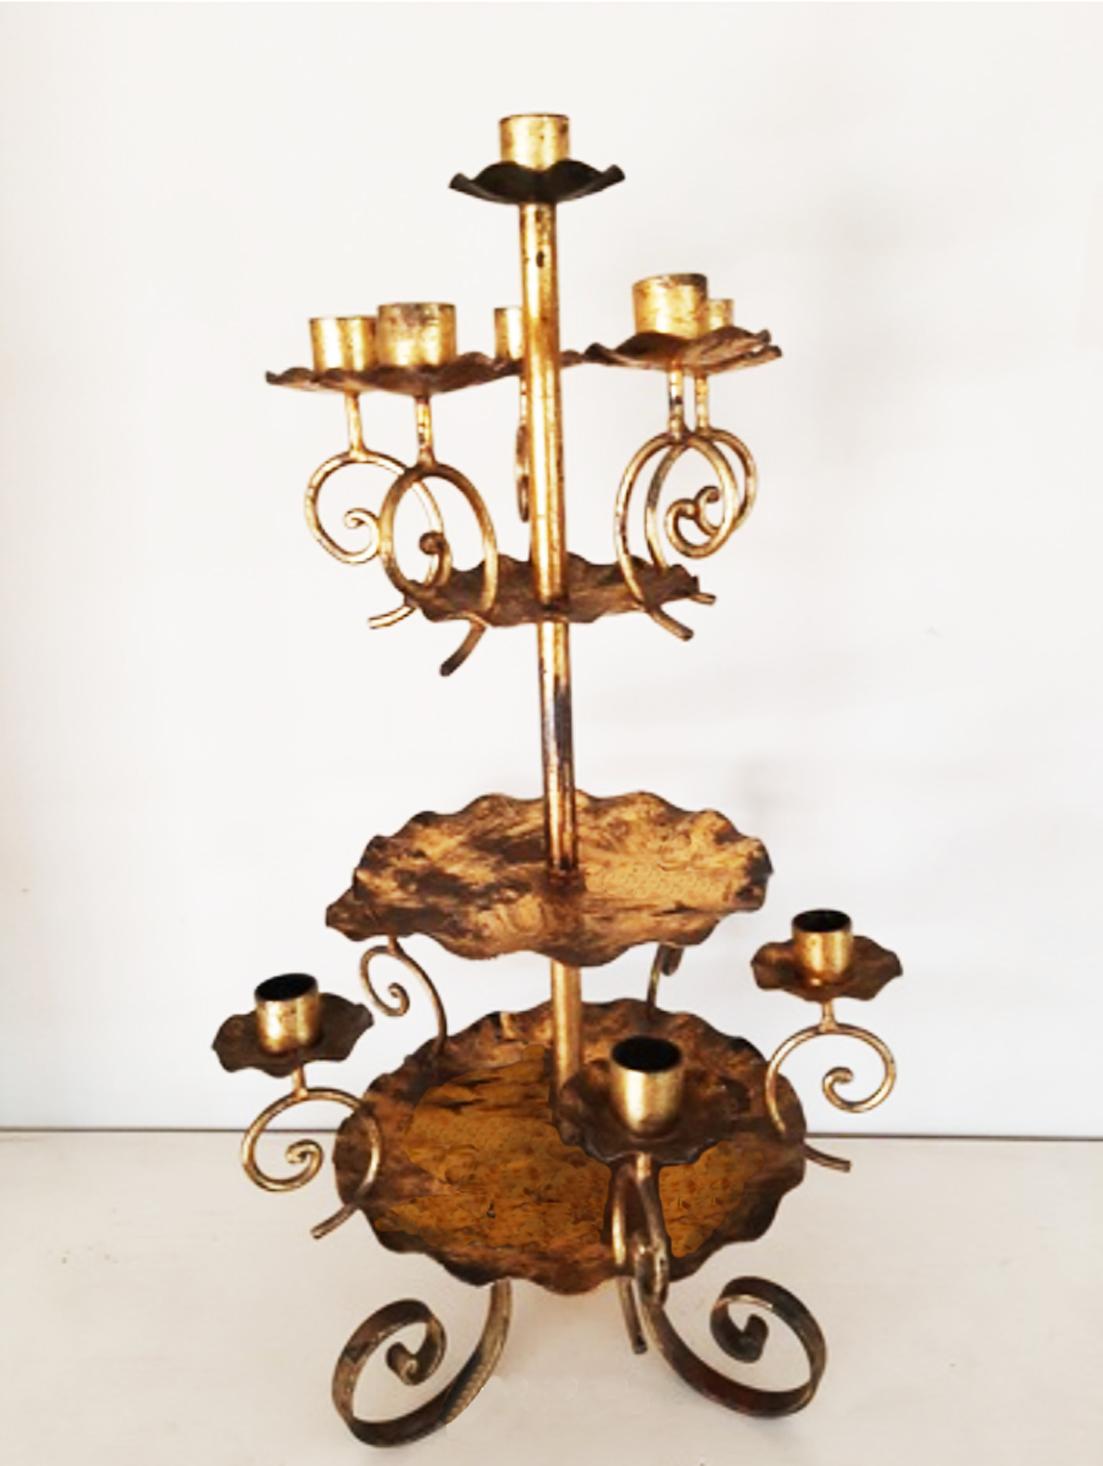 Votive candlestick, for 10 candles, made in wrought iron 
Golden candlestick candleholder or centerpiece to place on a table candle holder



   
 